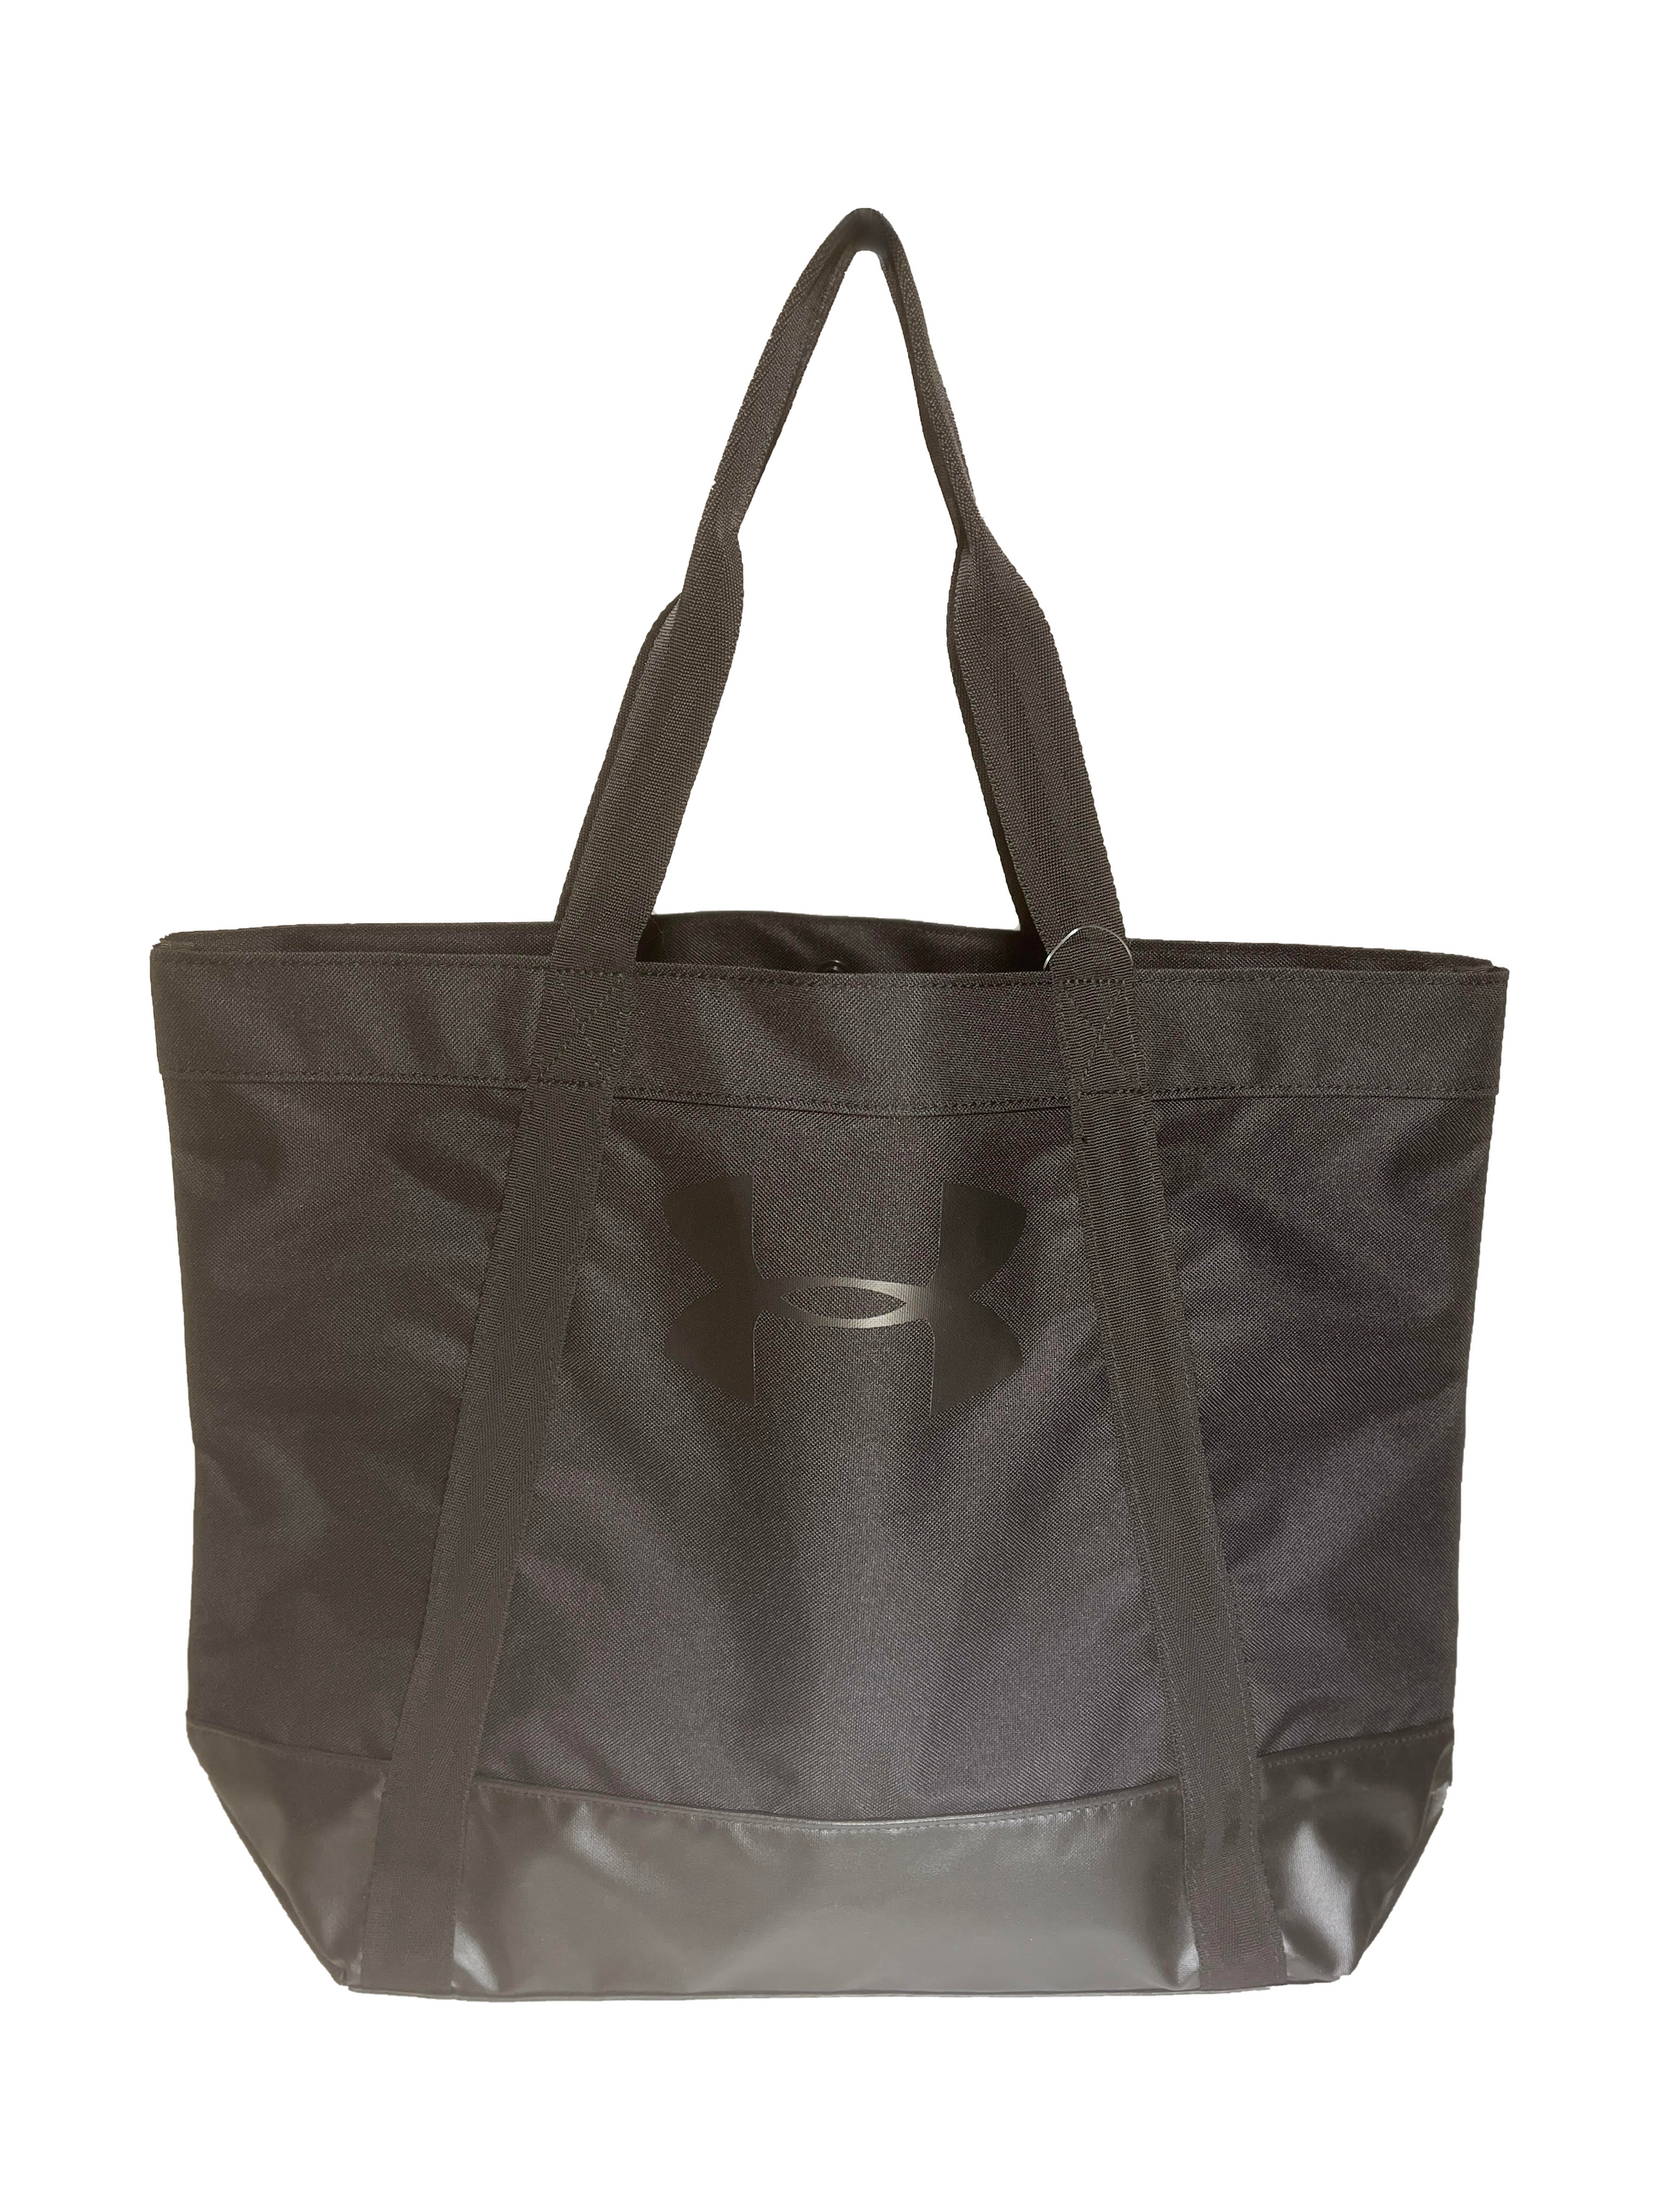 under-armour-womens-tote-bag-black